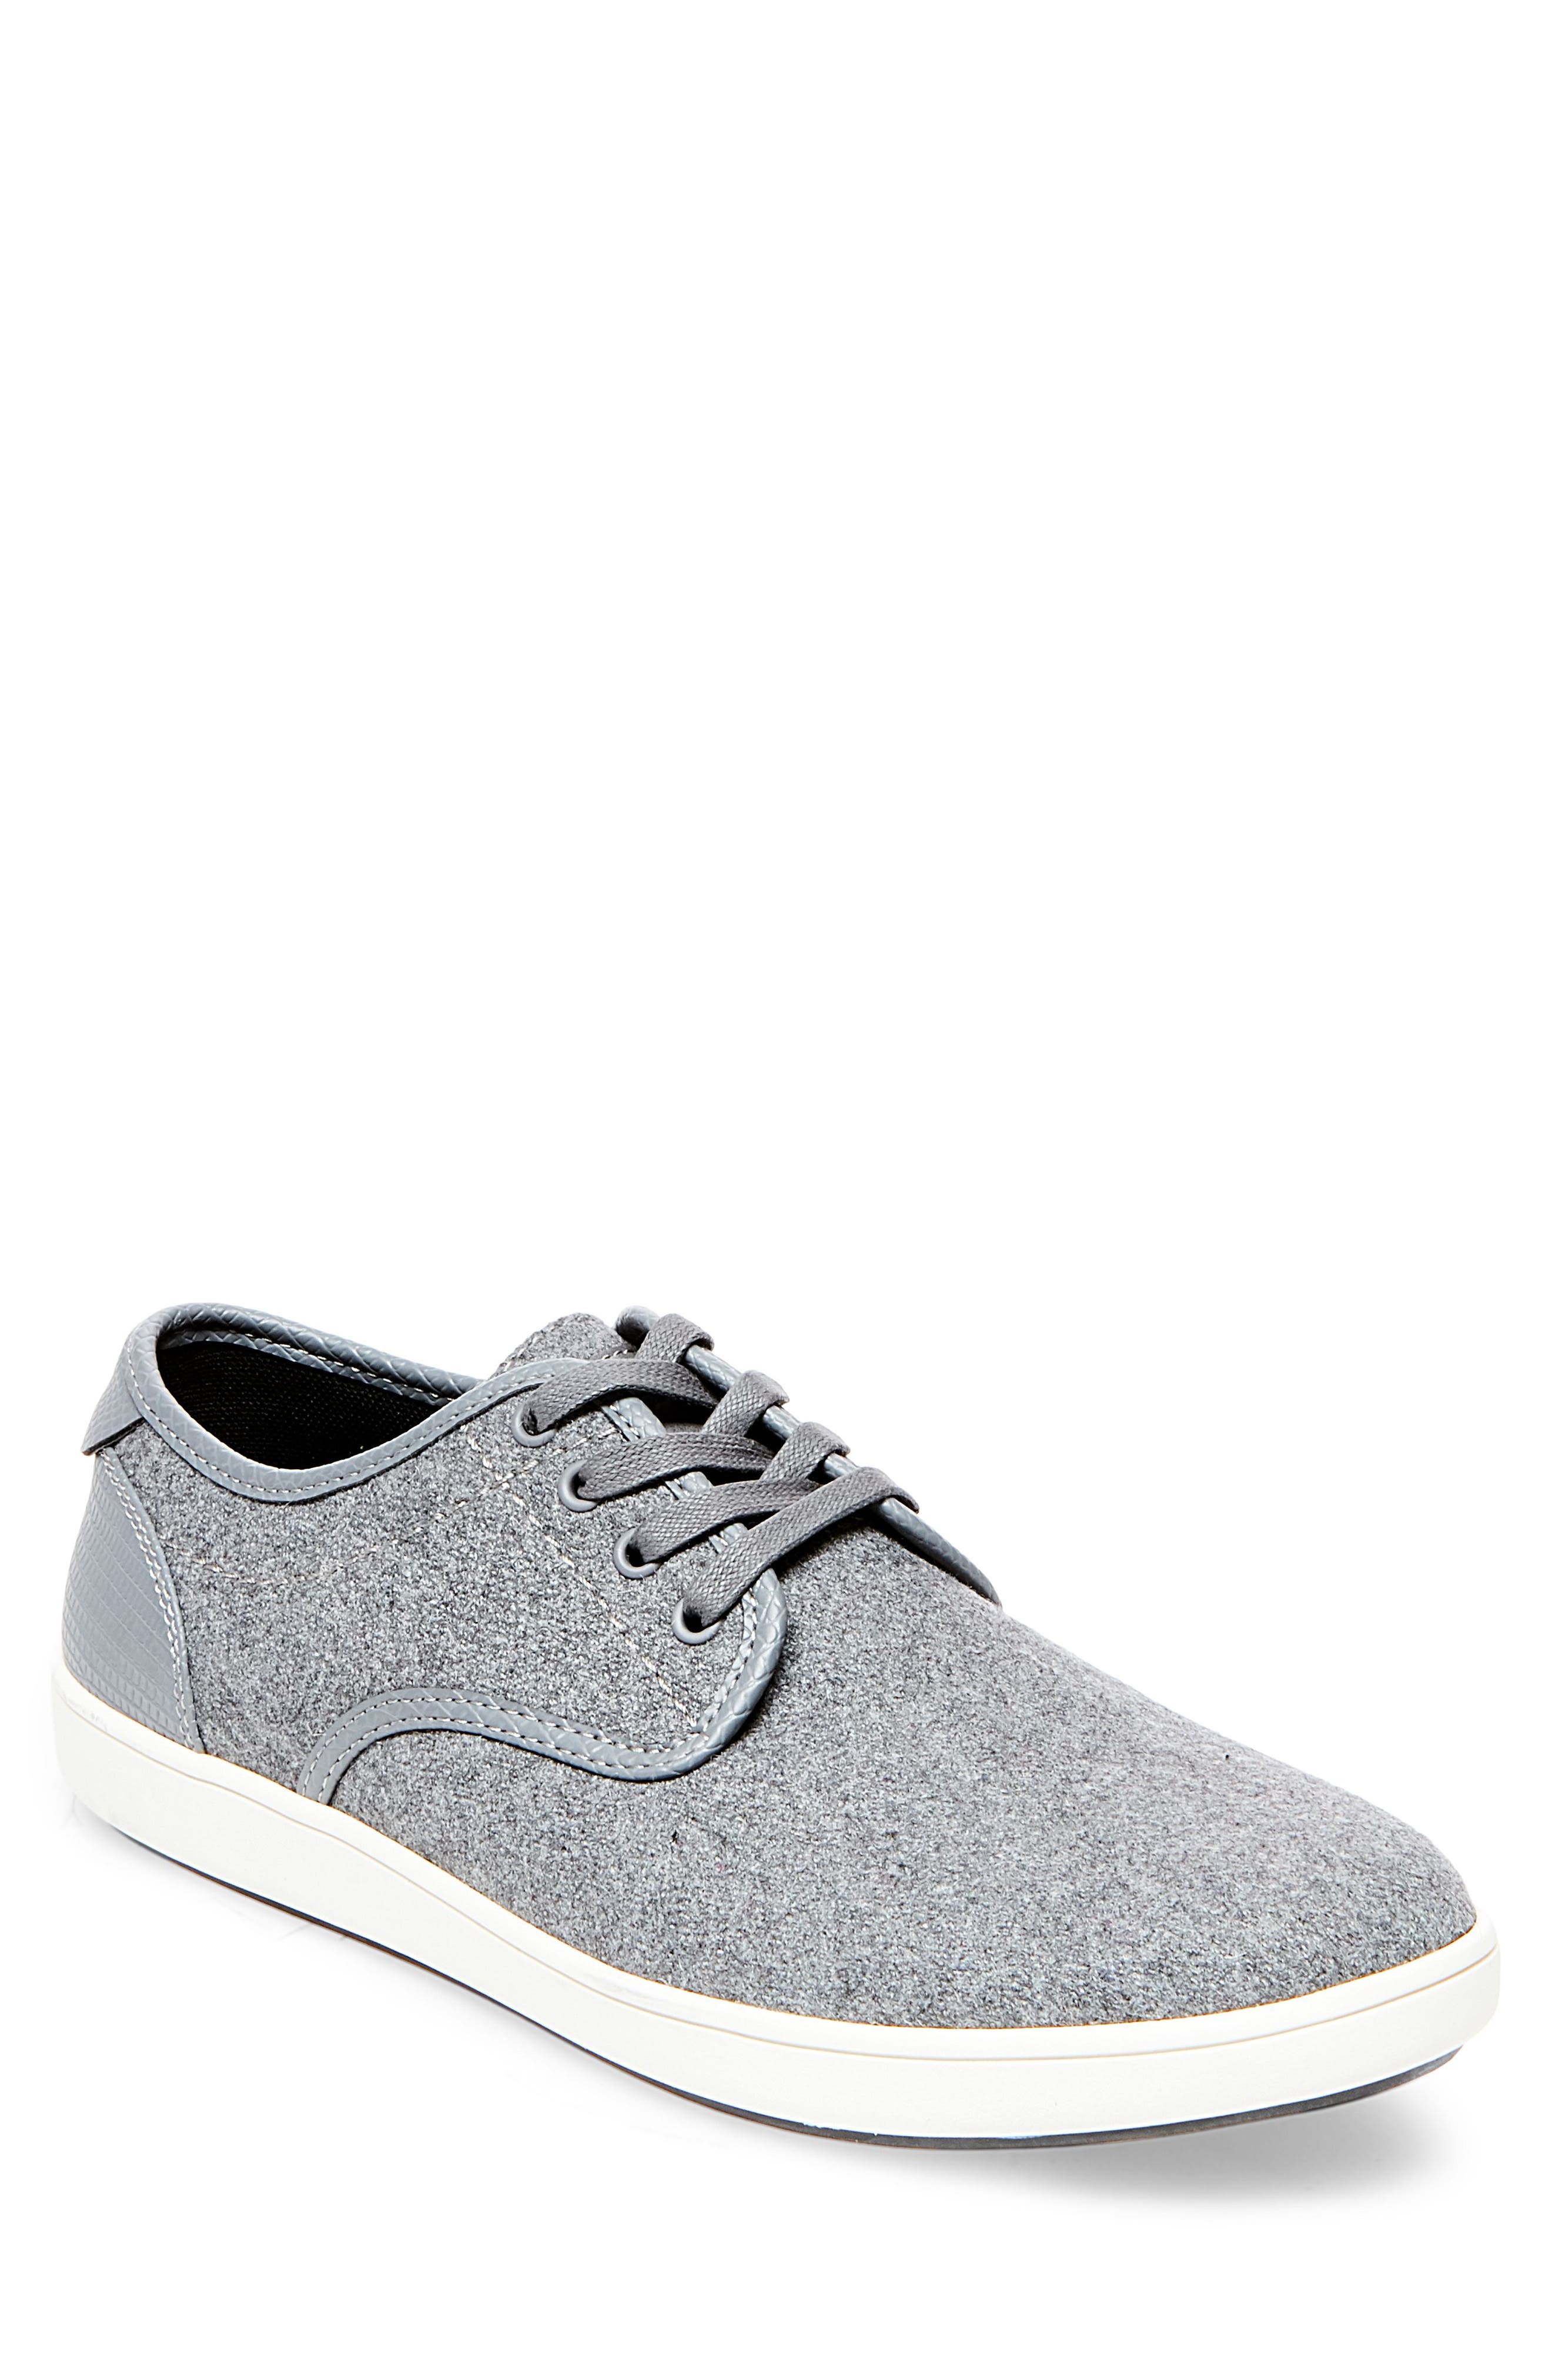 relaxed fit cessnock work sneaker